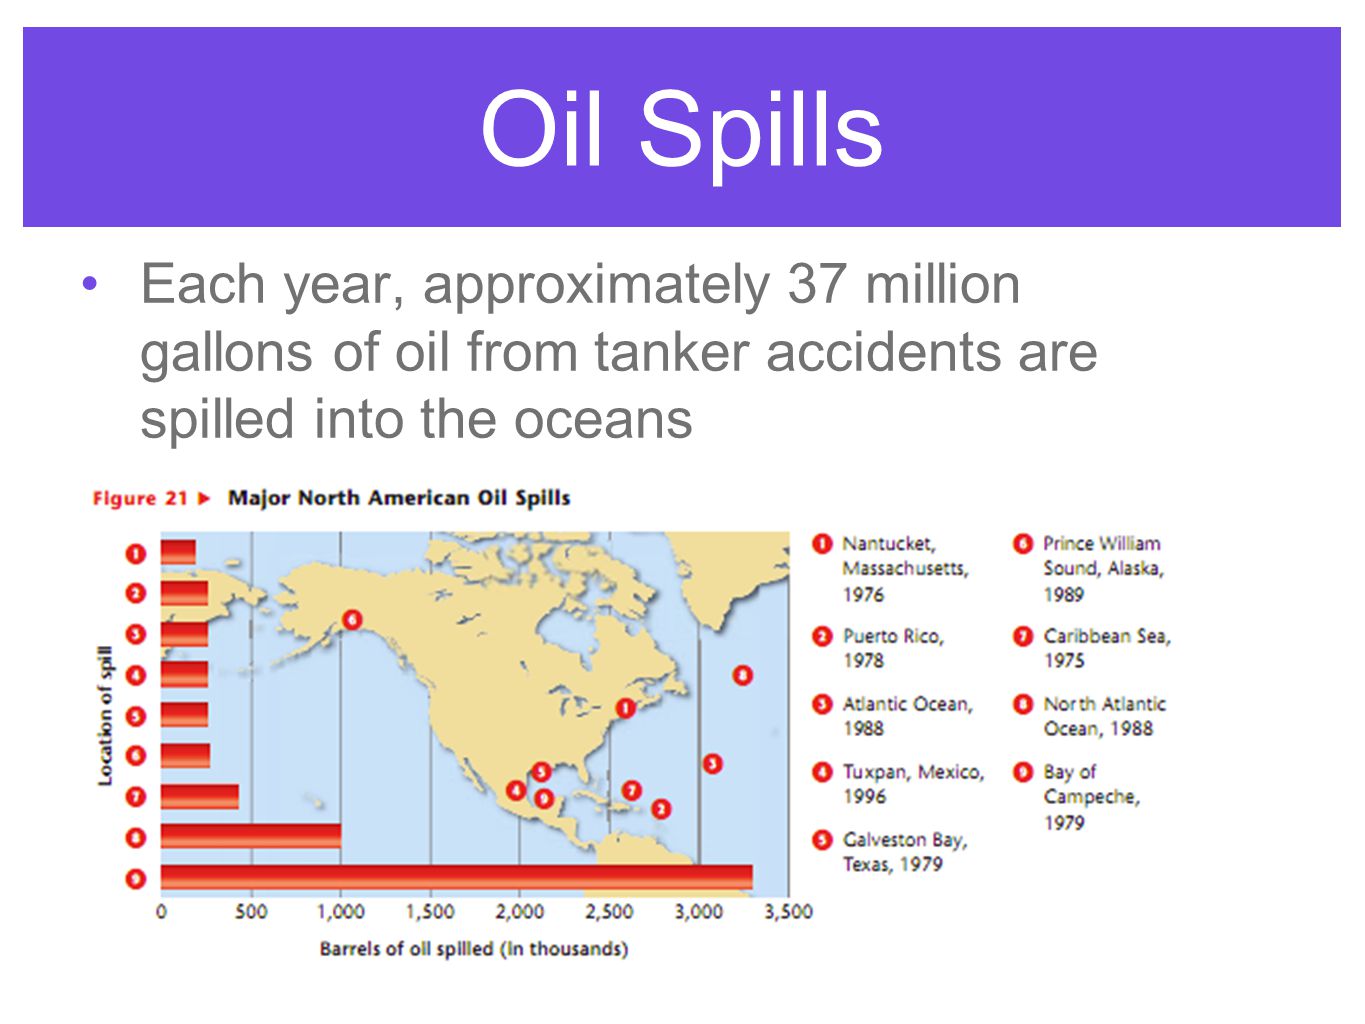 Each year, approximately 37 million gallons of oil from tanker accidents are spilled into the oceans